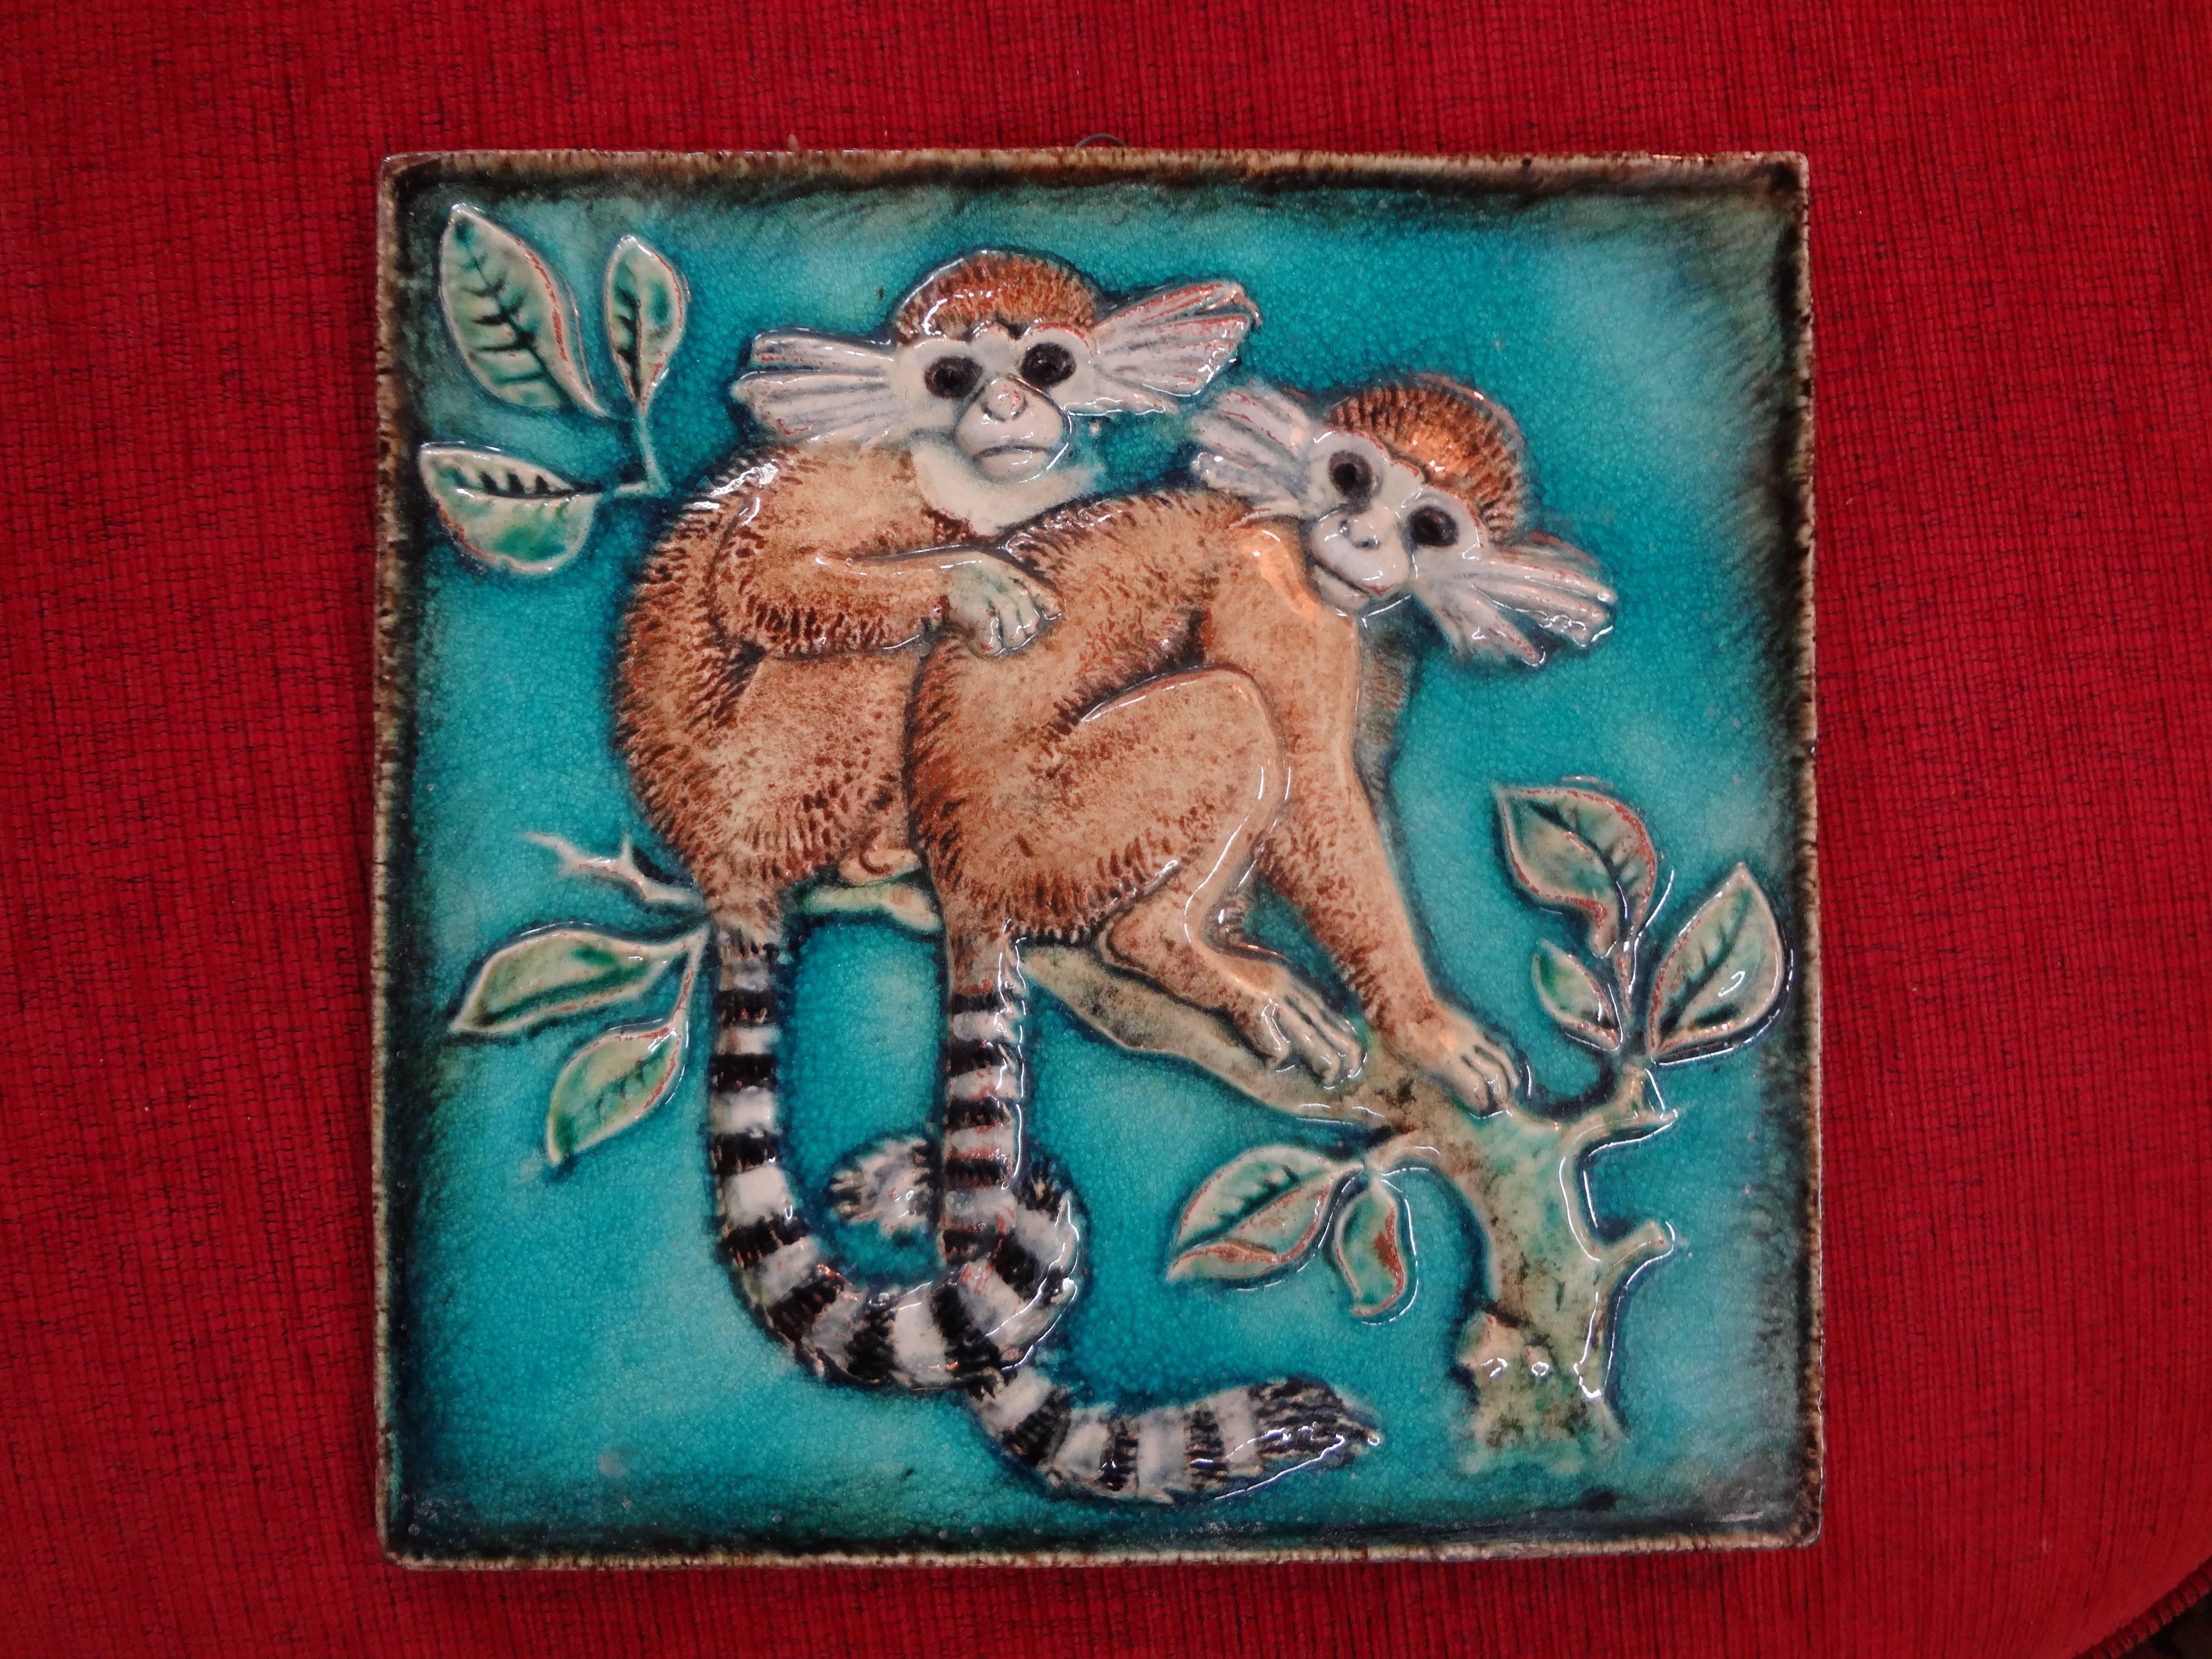 German glazed terracotta monkey tile by Karlshrue.
German glazed terracotta or Majolica monkey tile by Karlshrue, circa 1920. This gorgeous wall art depicts two monkeys on a tree branch. Well detailed and beautiful colors. This piece has an attached